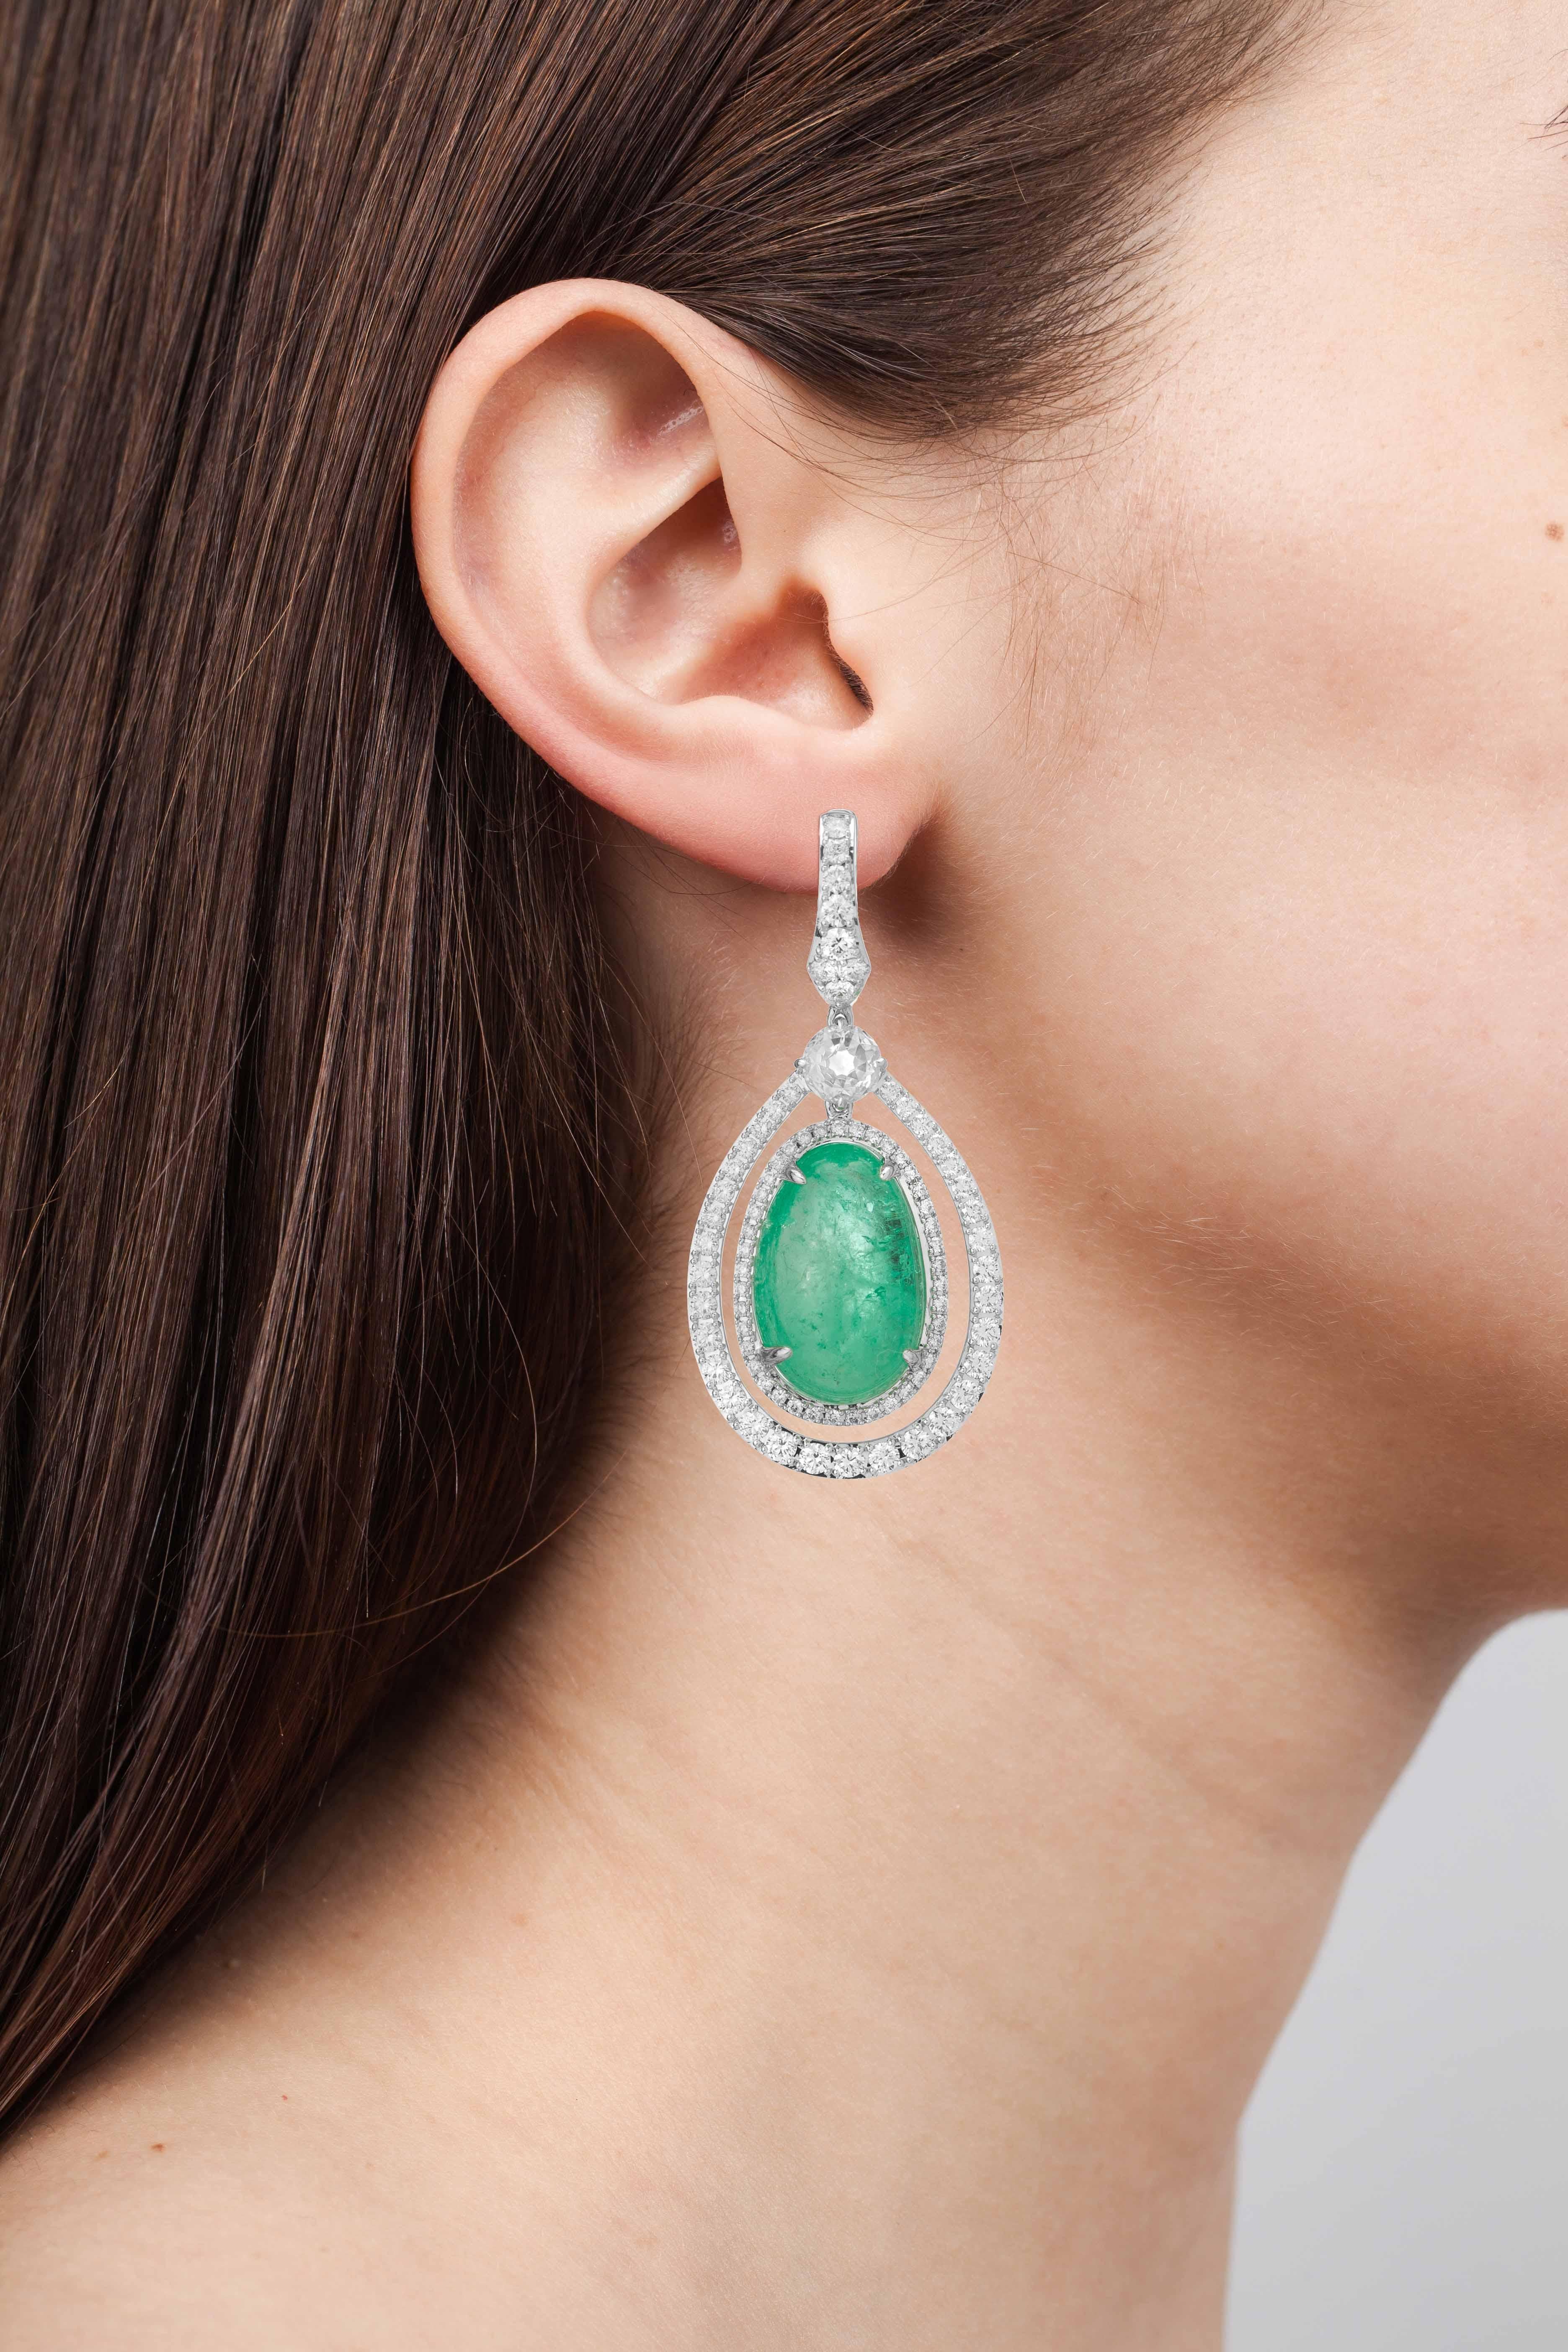 18 Karat white gold statement earrings set with 37.99 carats of Muzo Colombian emeralds and a single halo of round brilliant diamonds weighing 4.8 carats.

Muzo Emerald Colombia Heritage Verity Earrings set with 37.99 carats Emerald

Verity is a